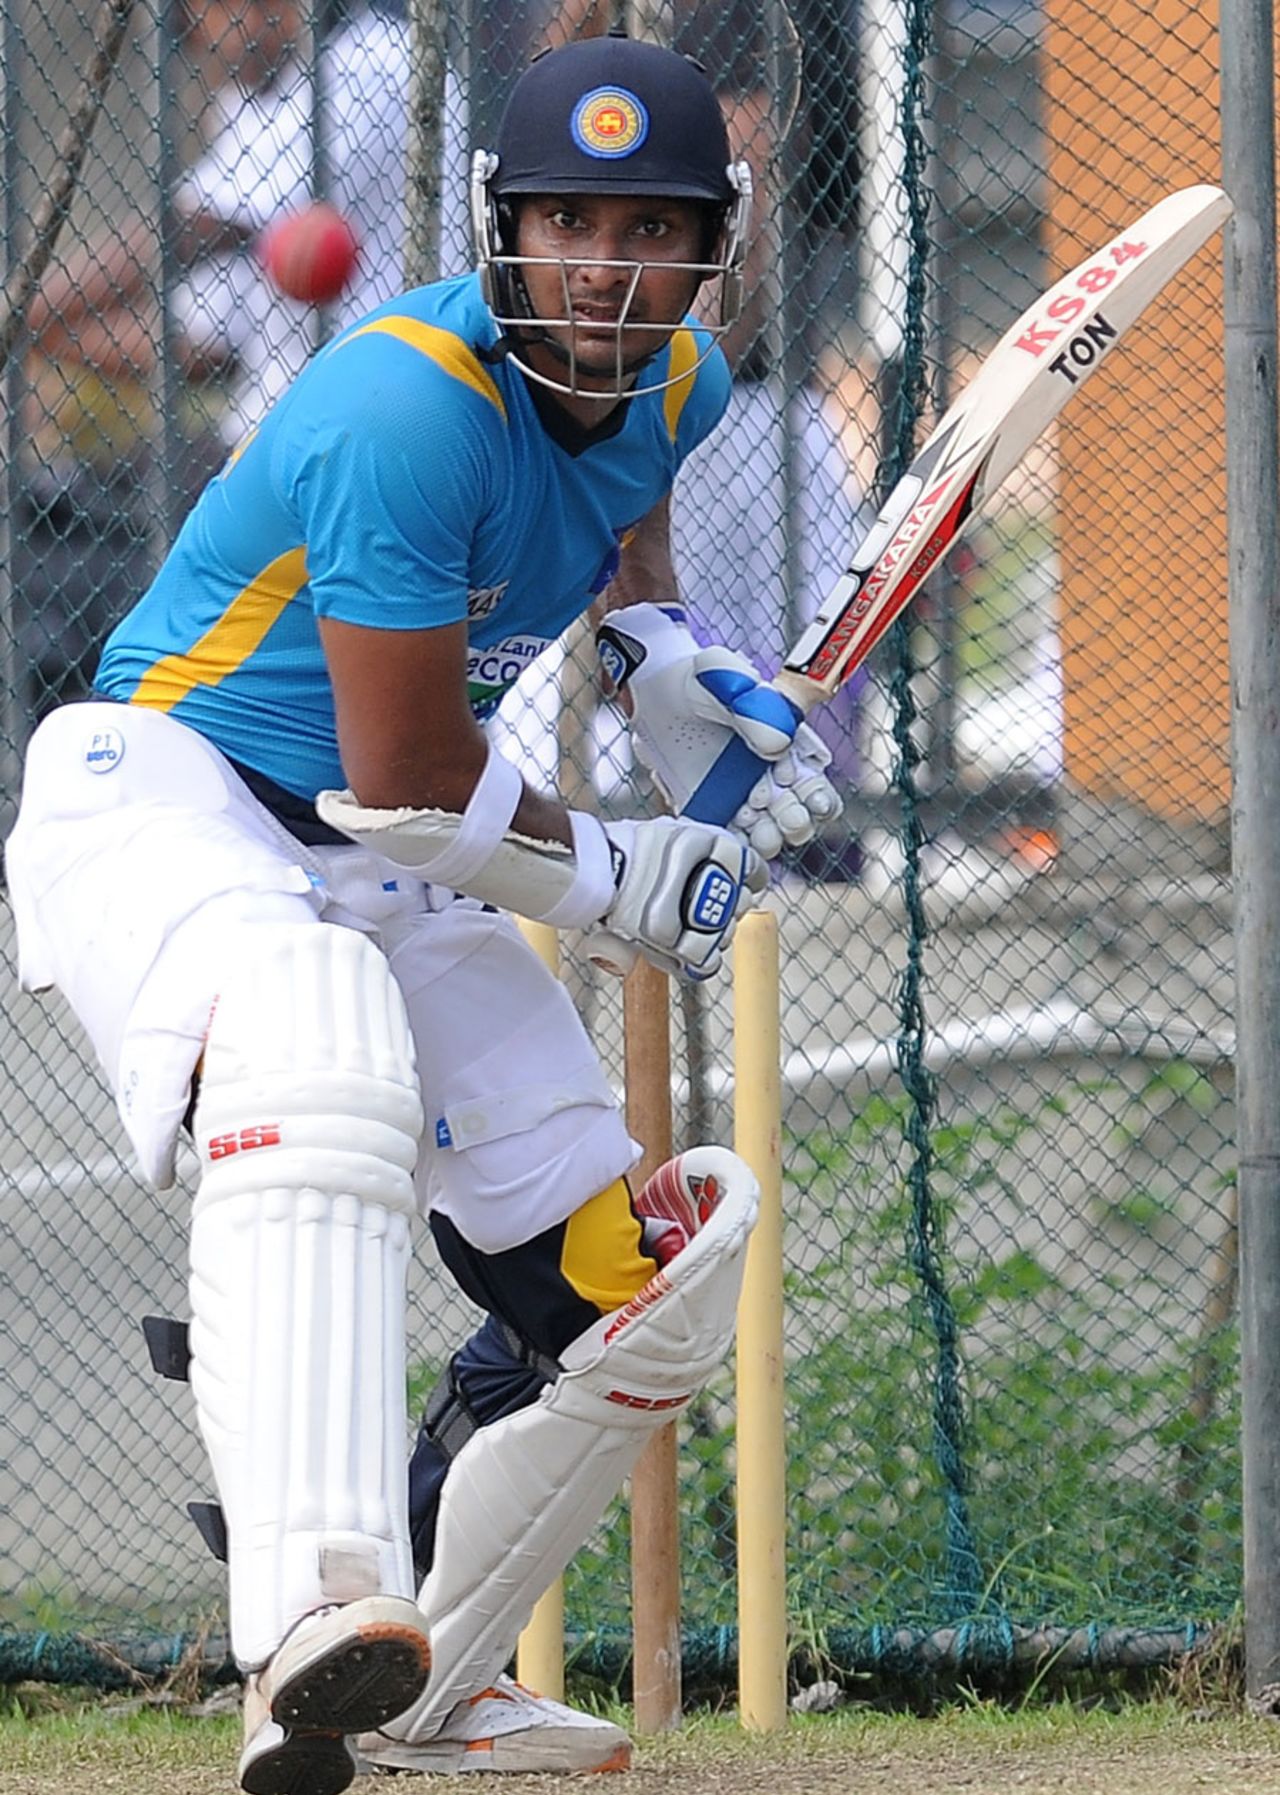 Kumar Sangakkara bats during a practice session in Galle ahead of the Test series against Bangladesh, Bangladesh tour of Sri Lanka 2012-13, Galle, March 6